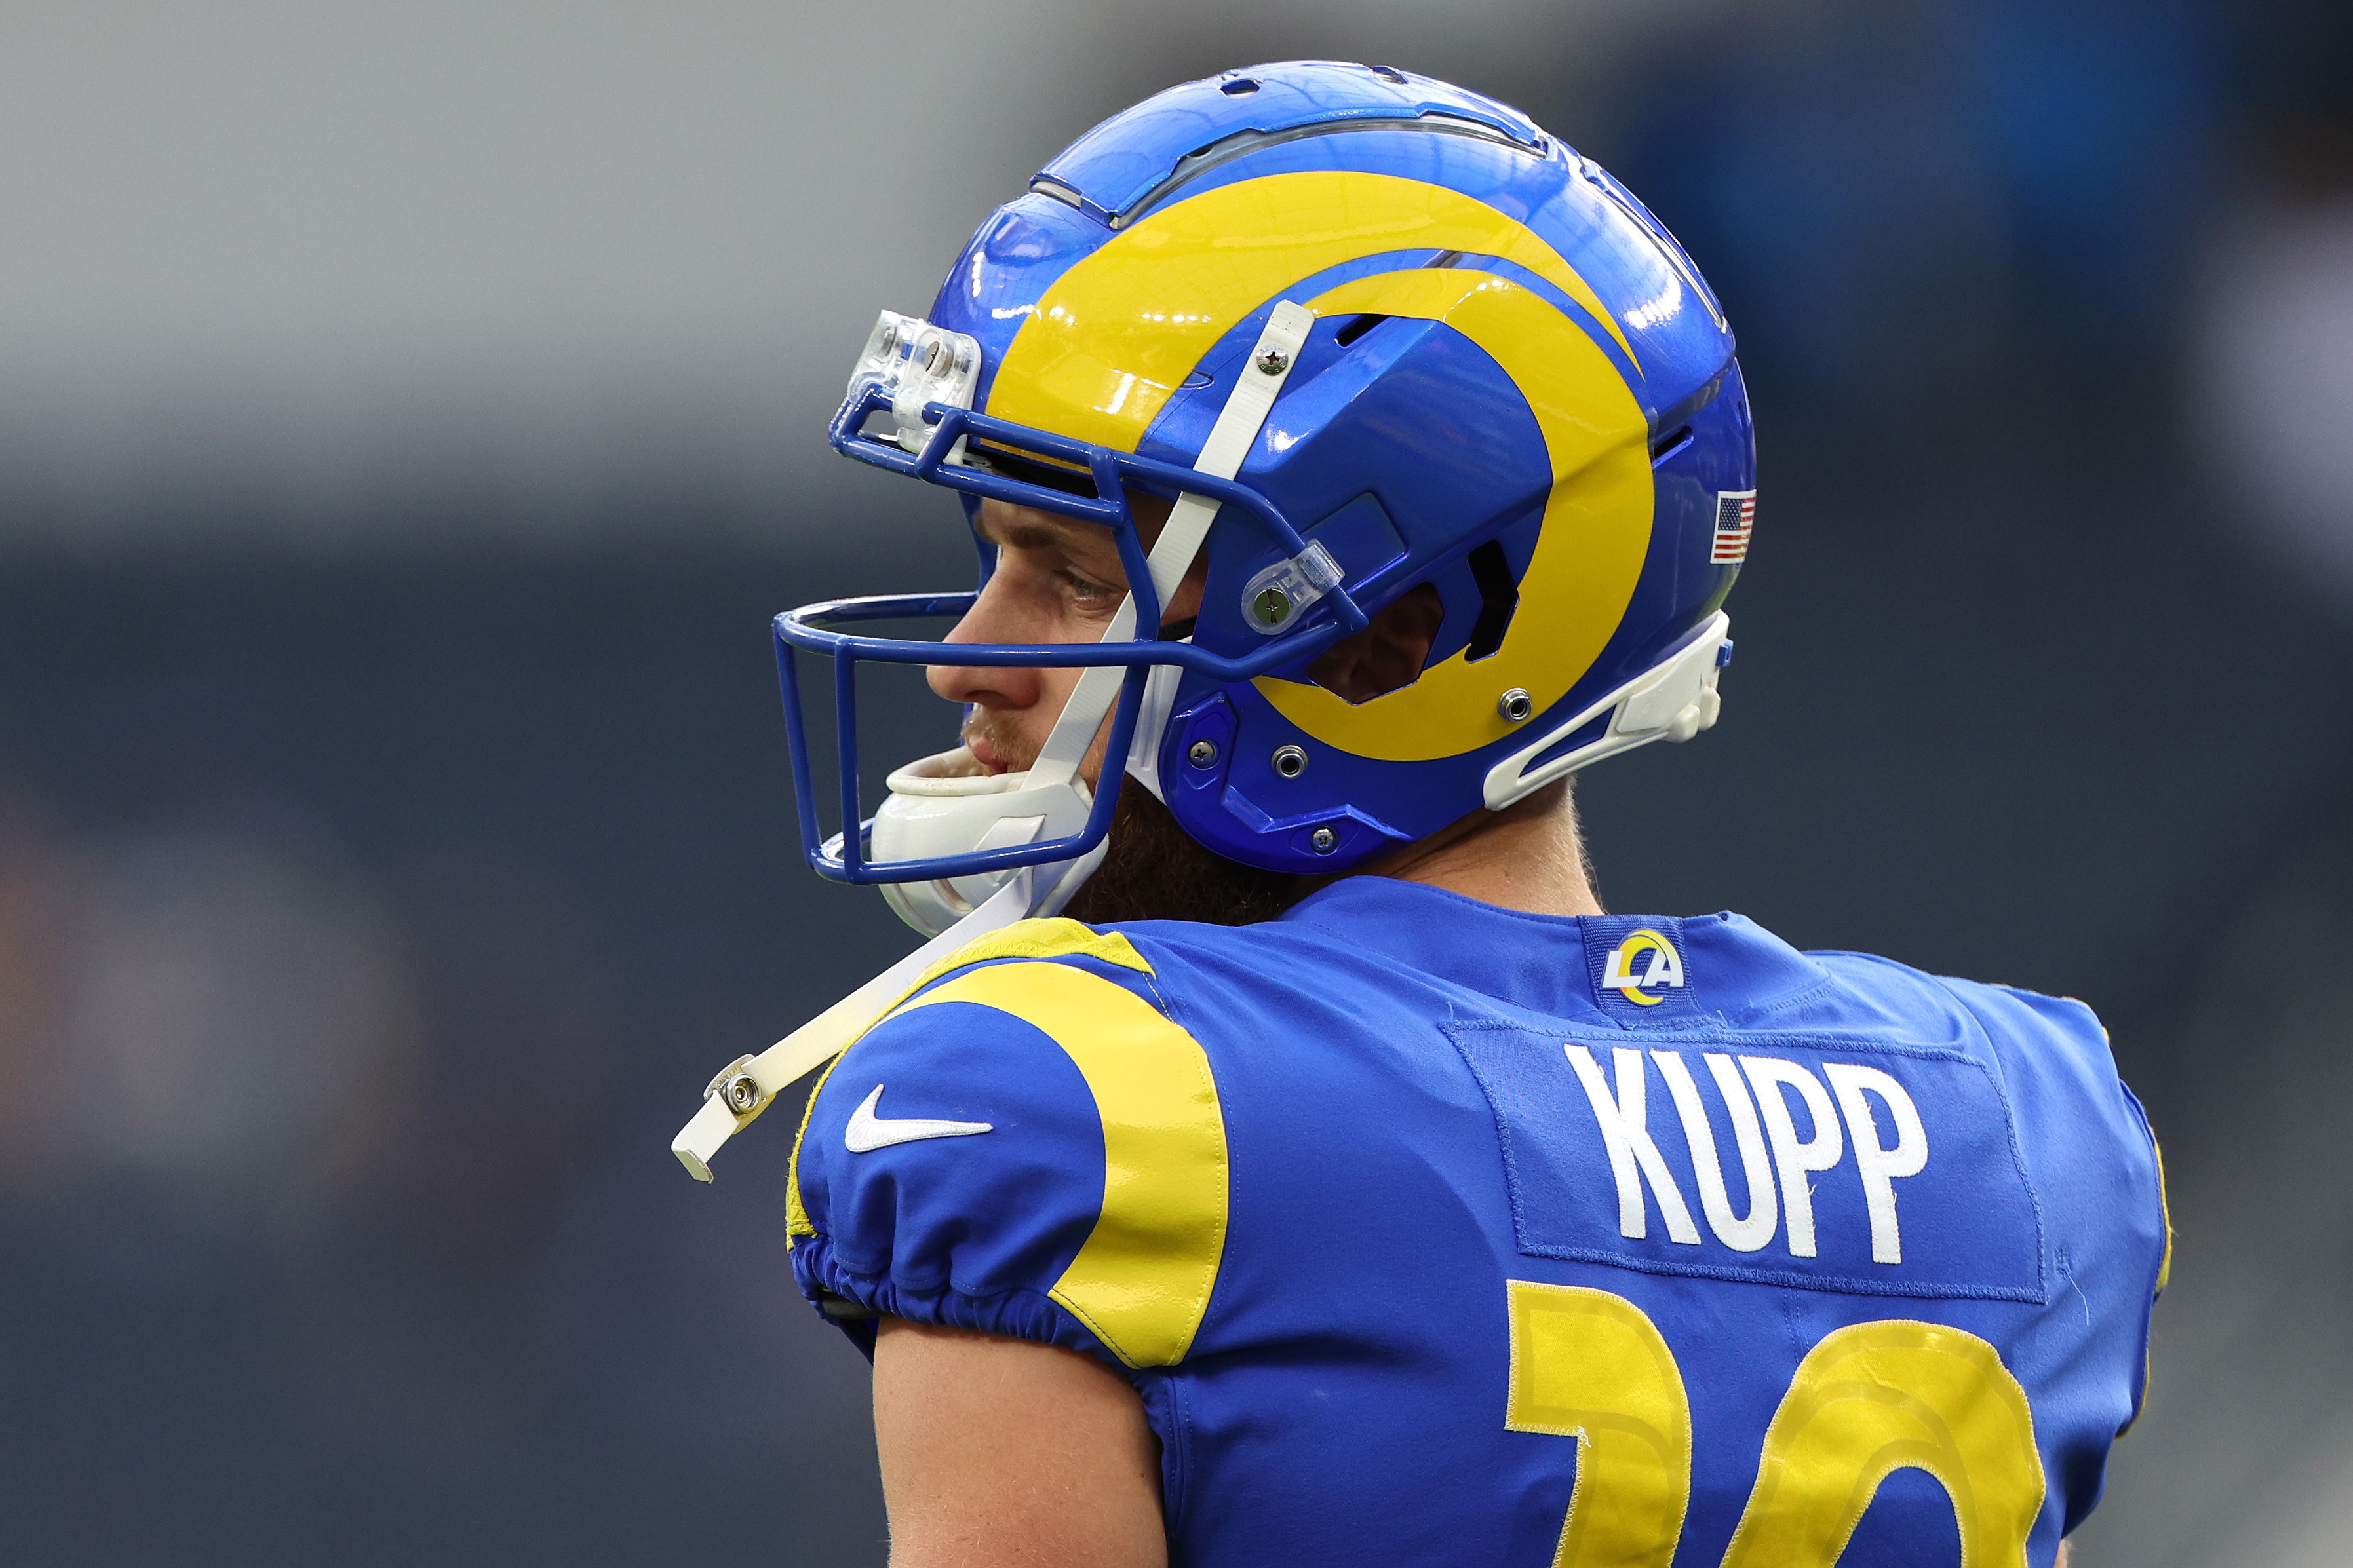 Cooper Kupp signed his extension wearing a Matthew Stafford jersey